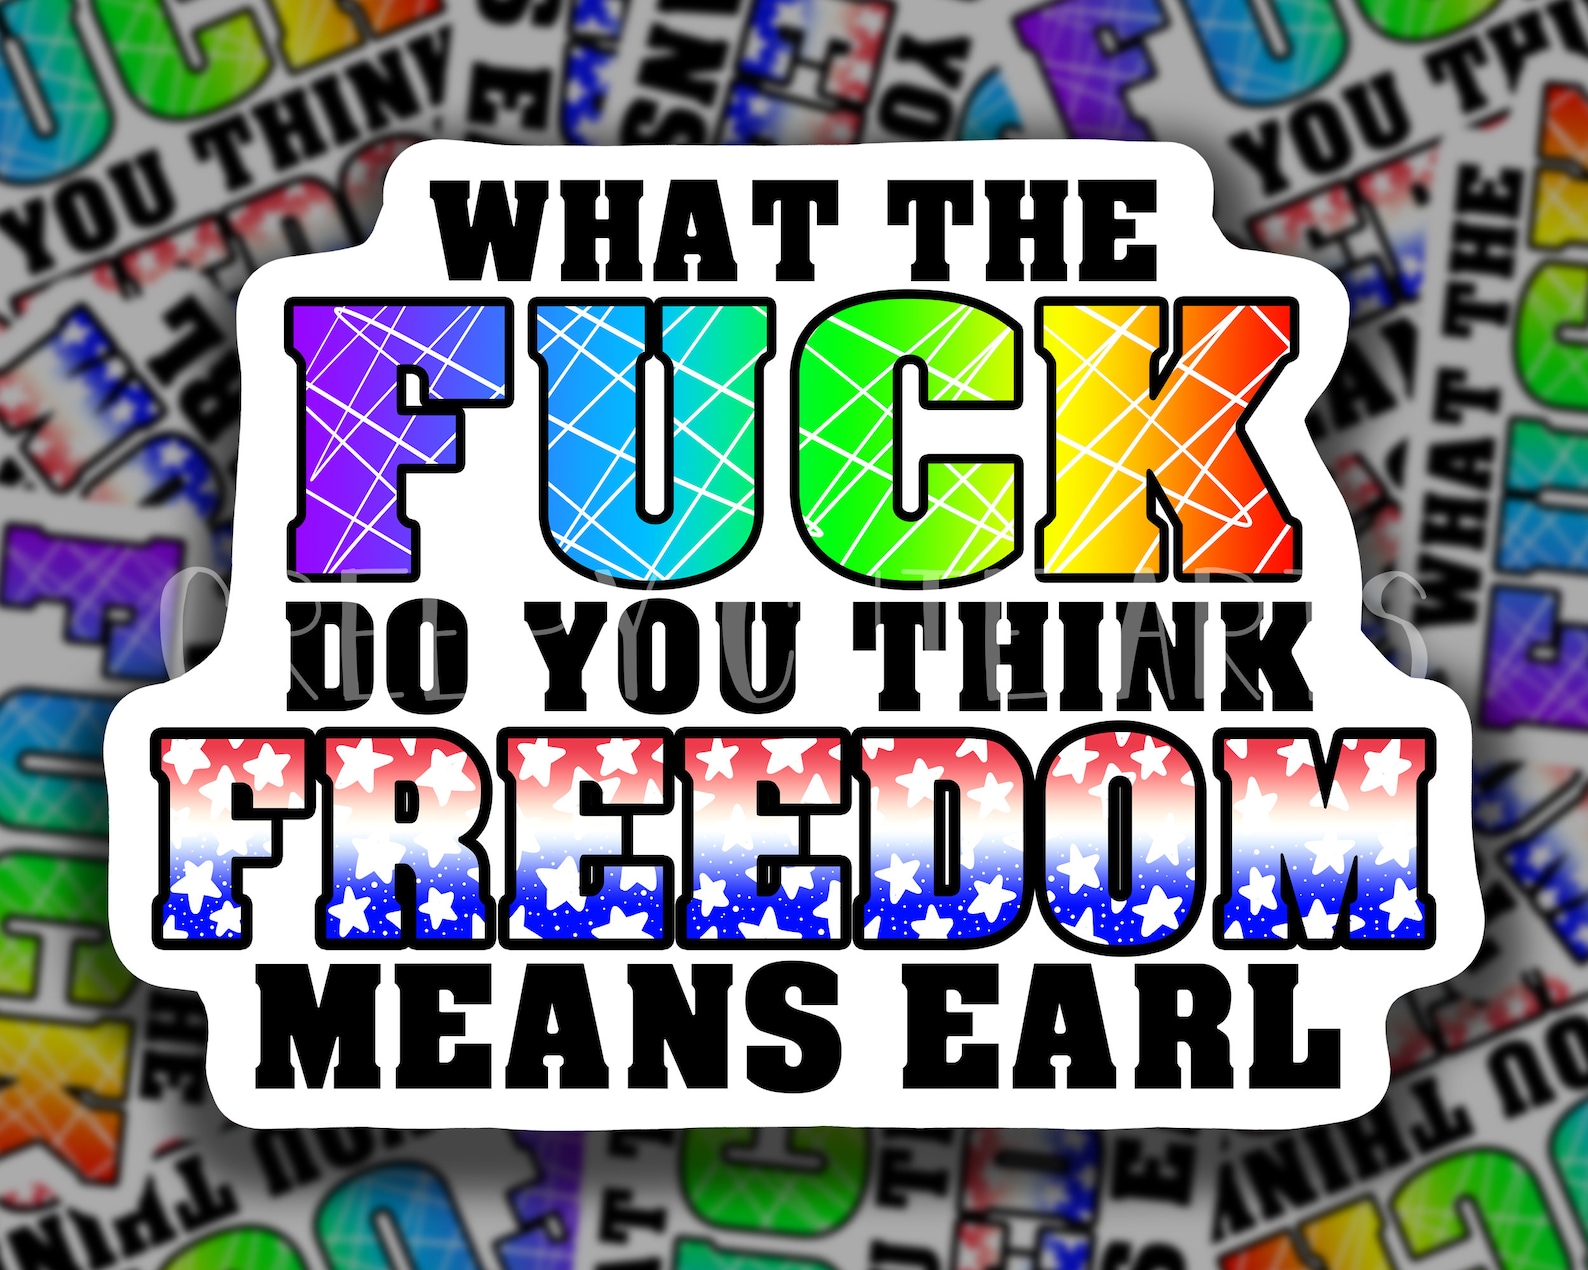 What The Fuck Do You Think Freedom Means Earl Vinyl Bumper Etsy